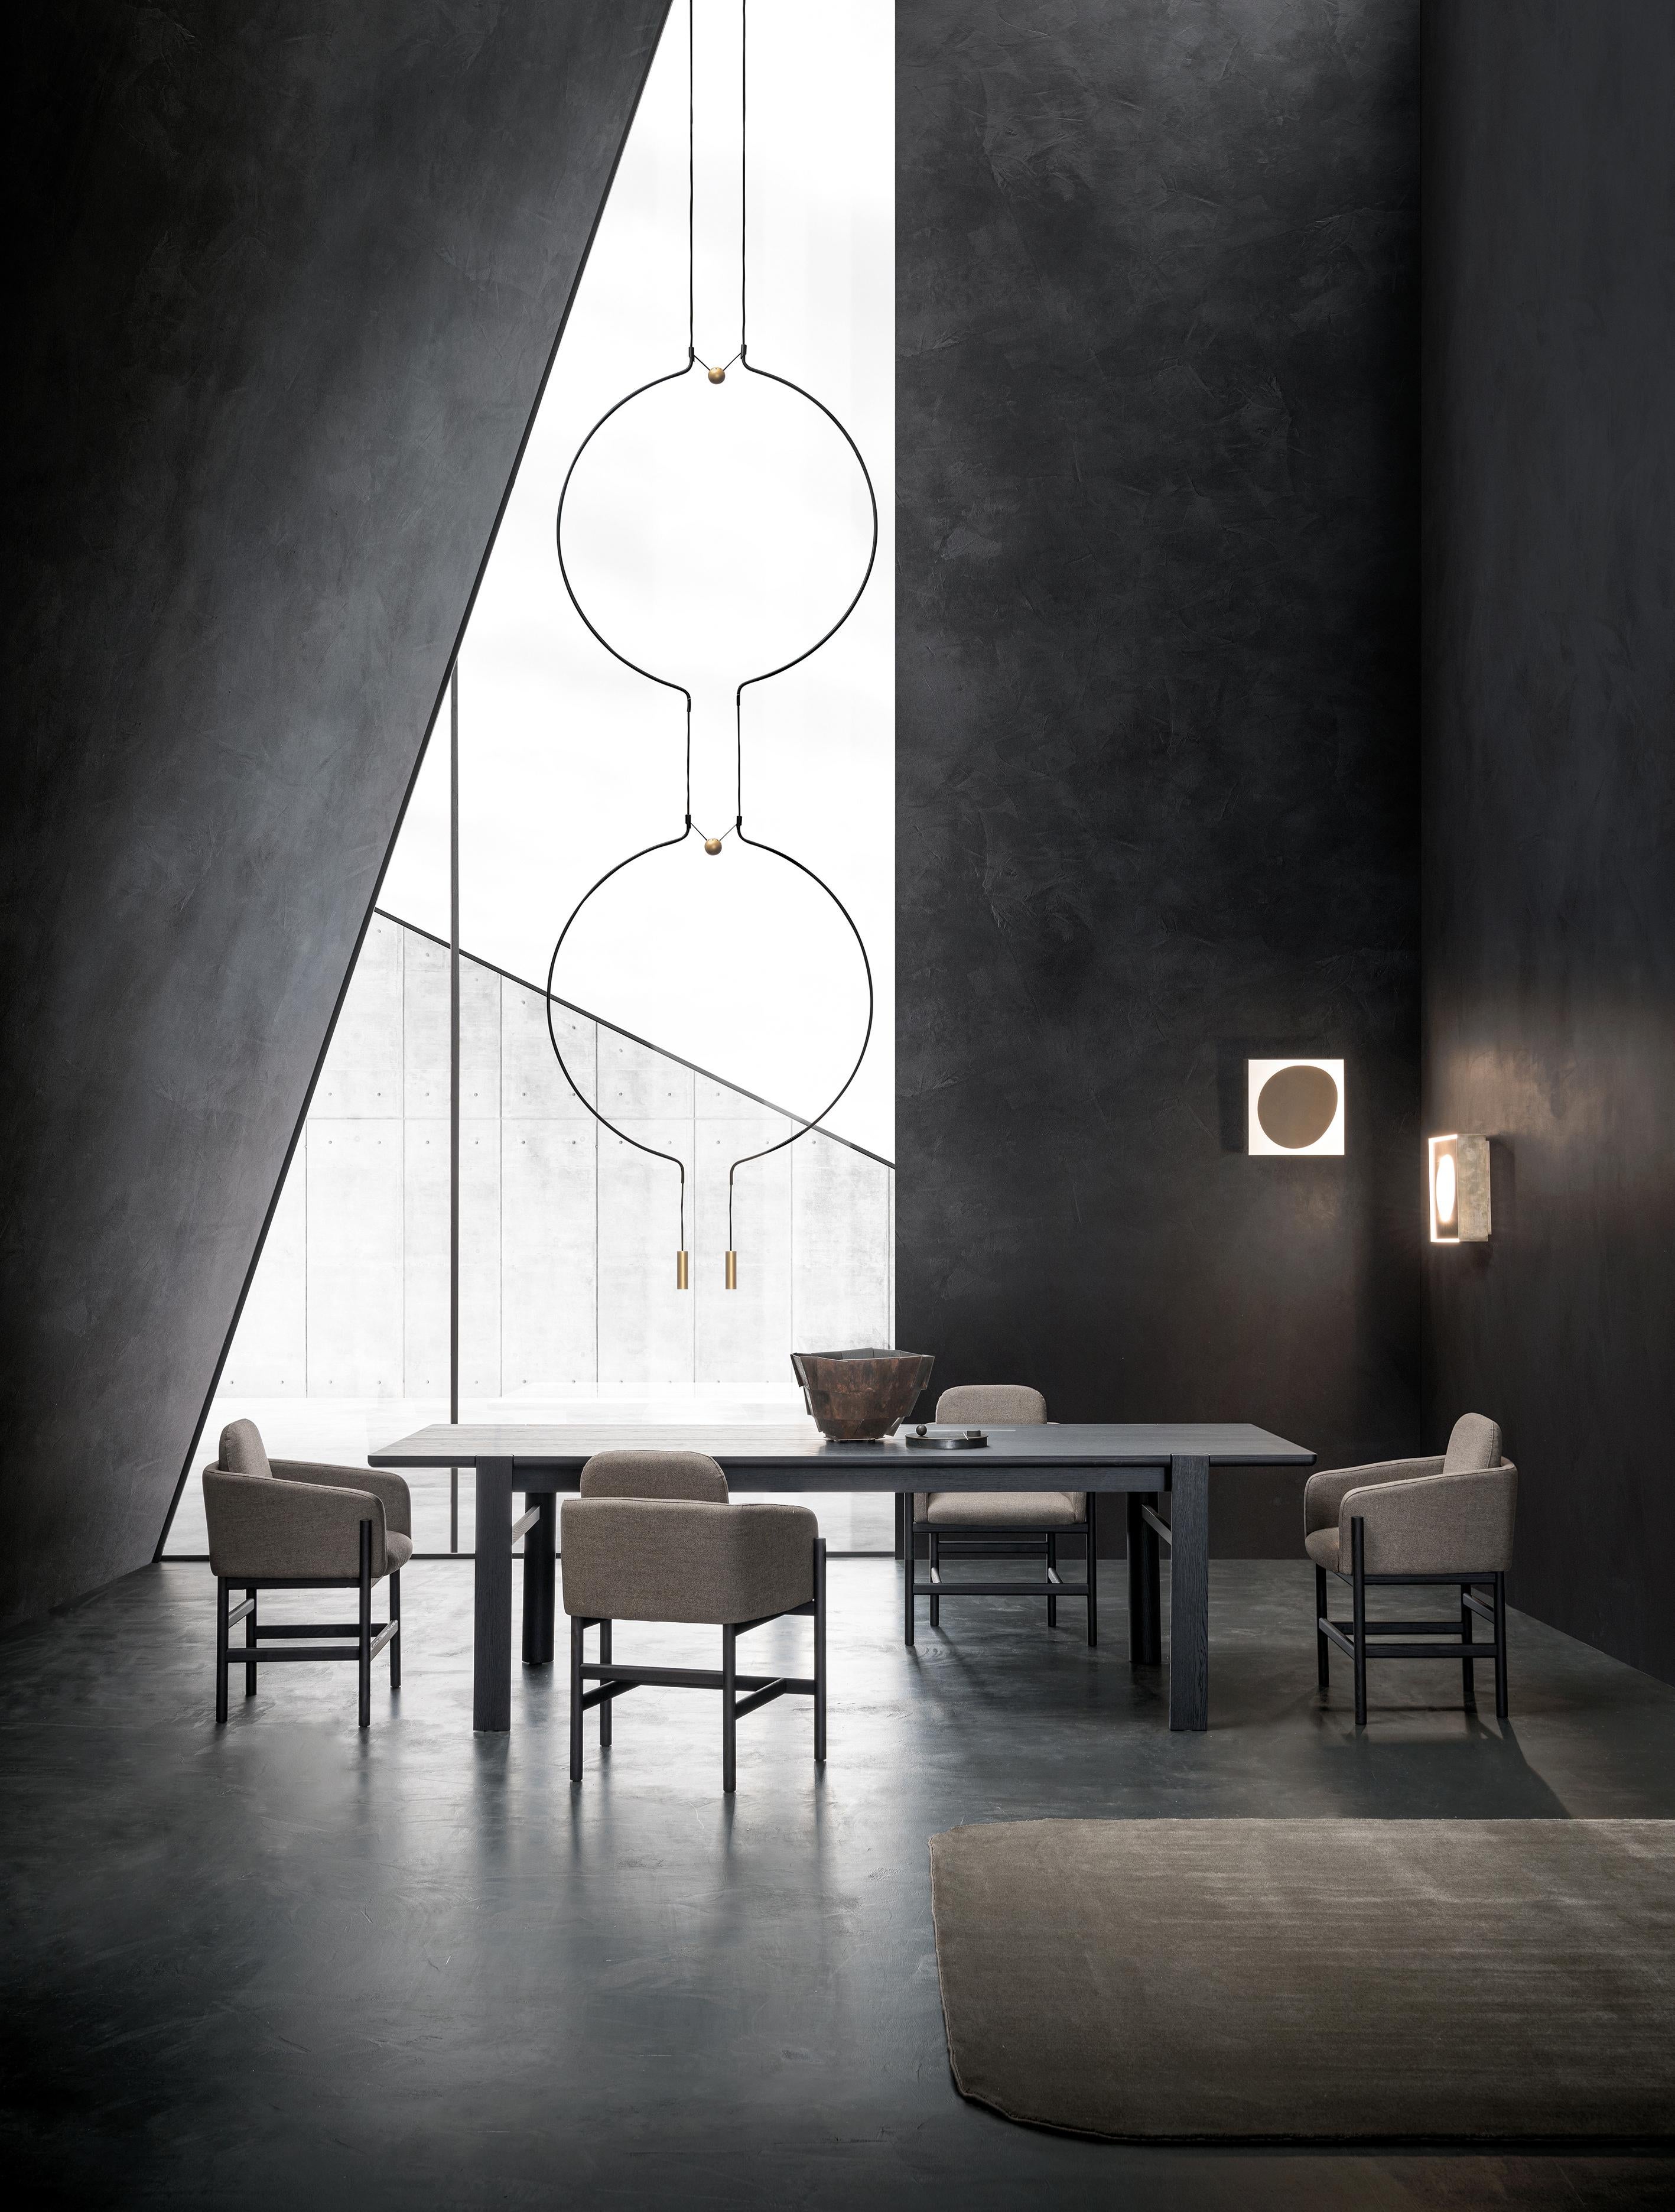 Axolight Liaison Model M4 Pendant Lamp in Black/Gold by Sara Moroni

Modular lightness and elegance. Liaison tells about the perfect balance of three geometric archetypes: sphere, circle and cylinder compose a system that includes the single pendant